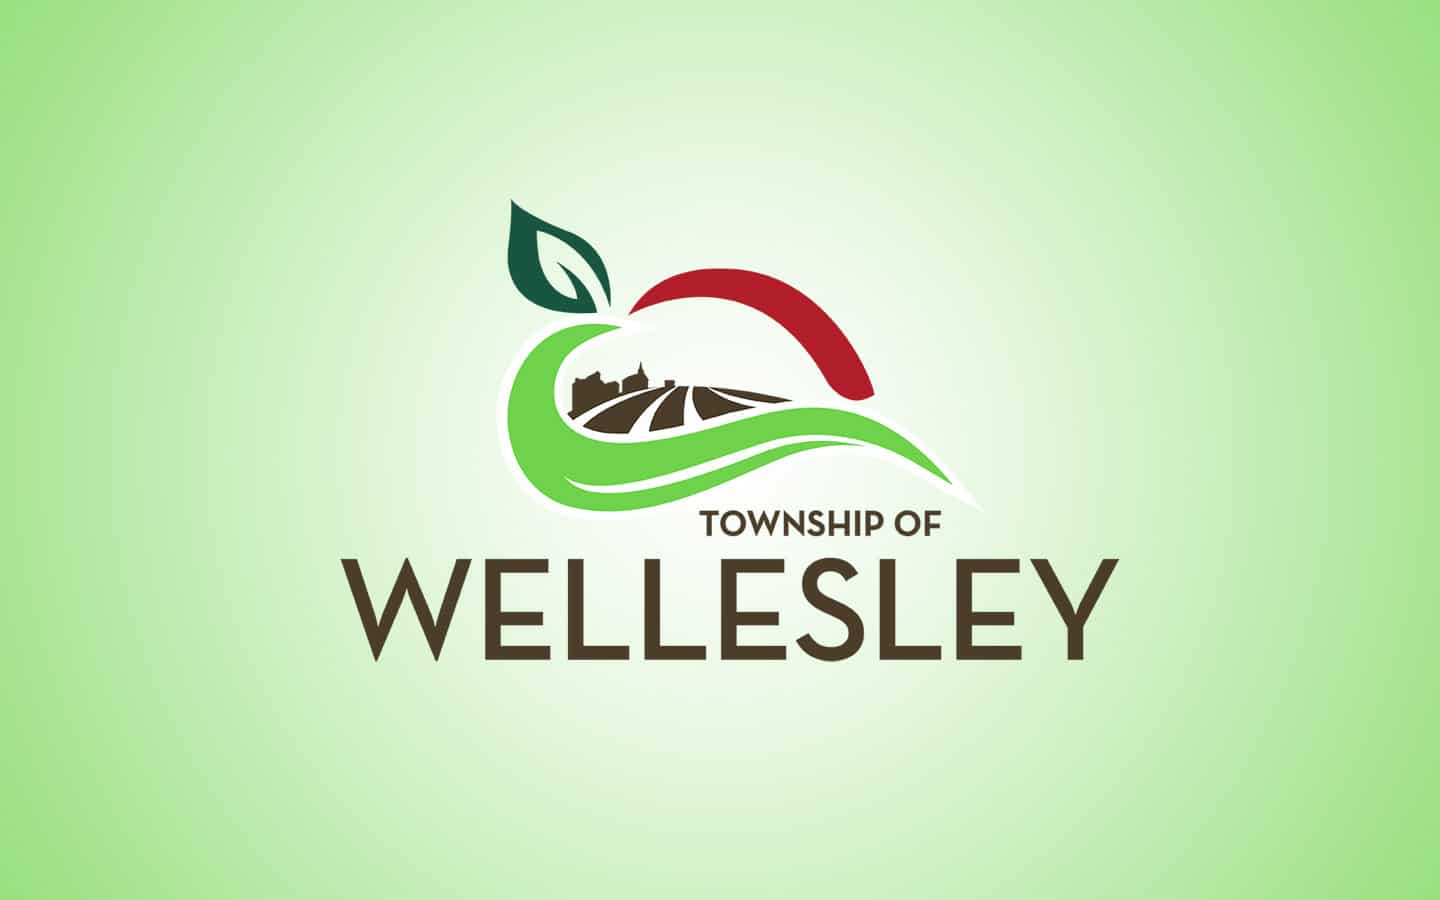                      Many issues at play in Wellesley opposition to tax hikes, experts say                             
                     